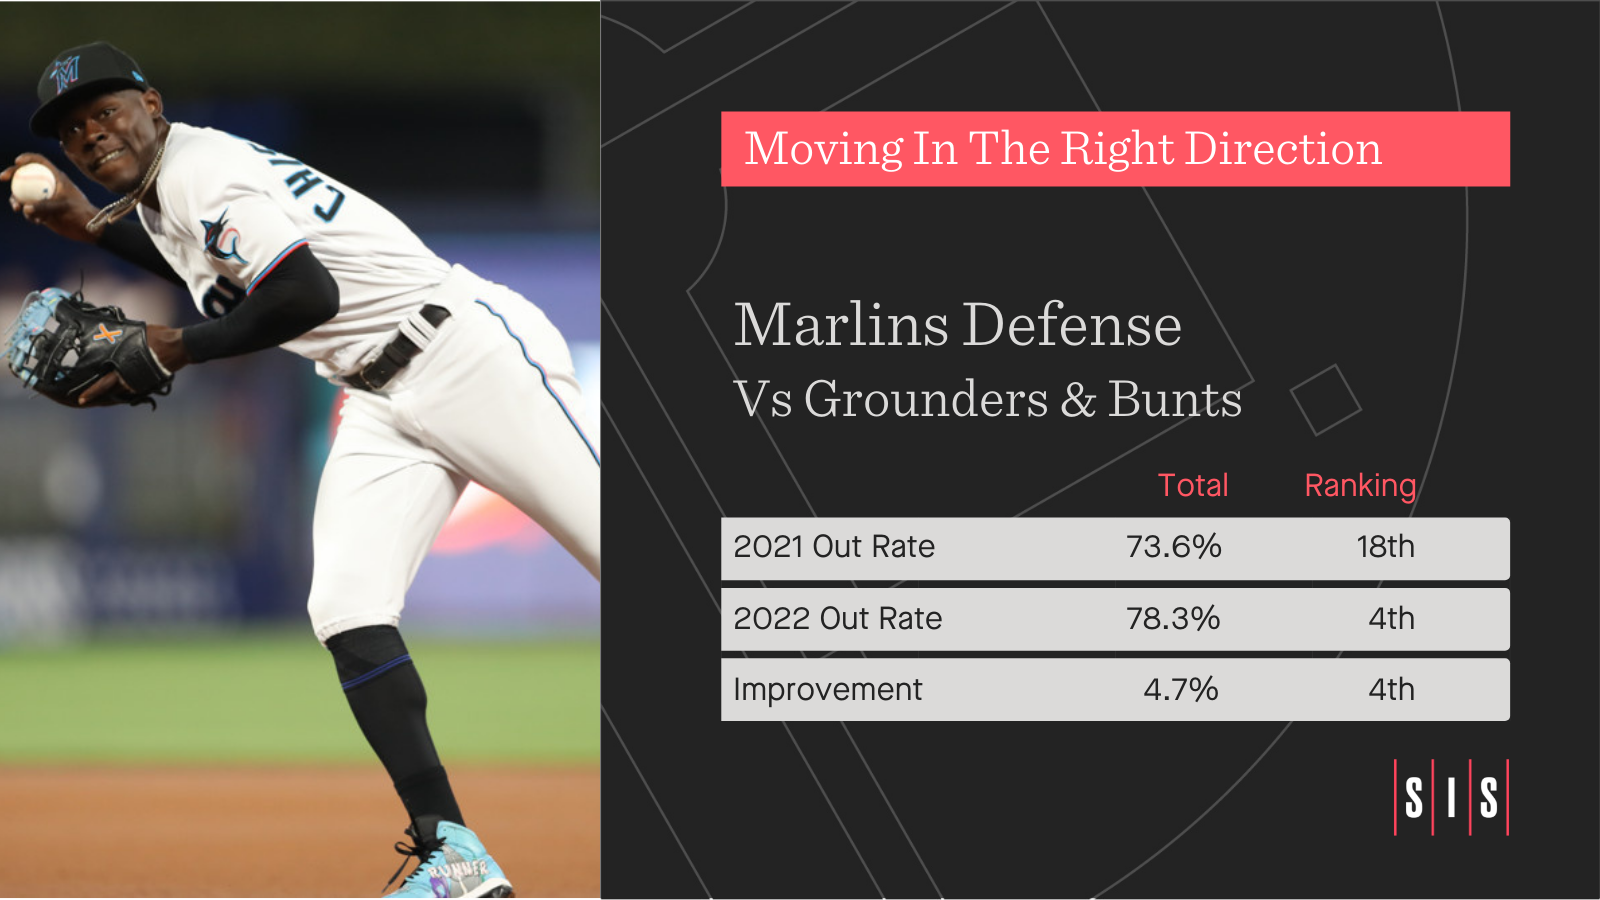 The Marlins have improved by a LOT at turning ground balls into outs from last year to this year.